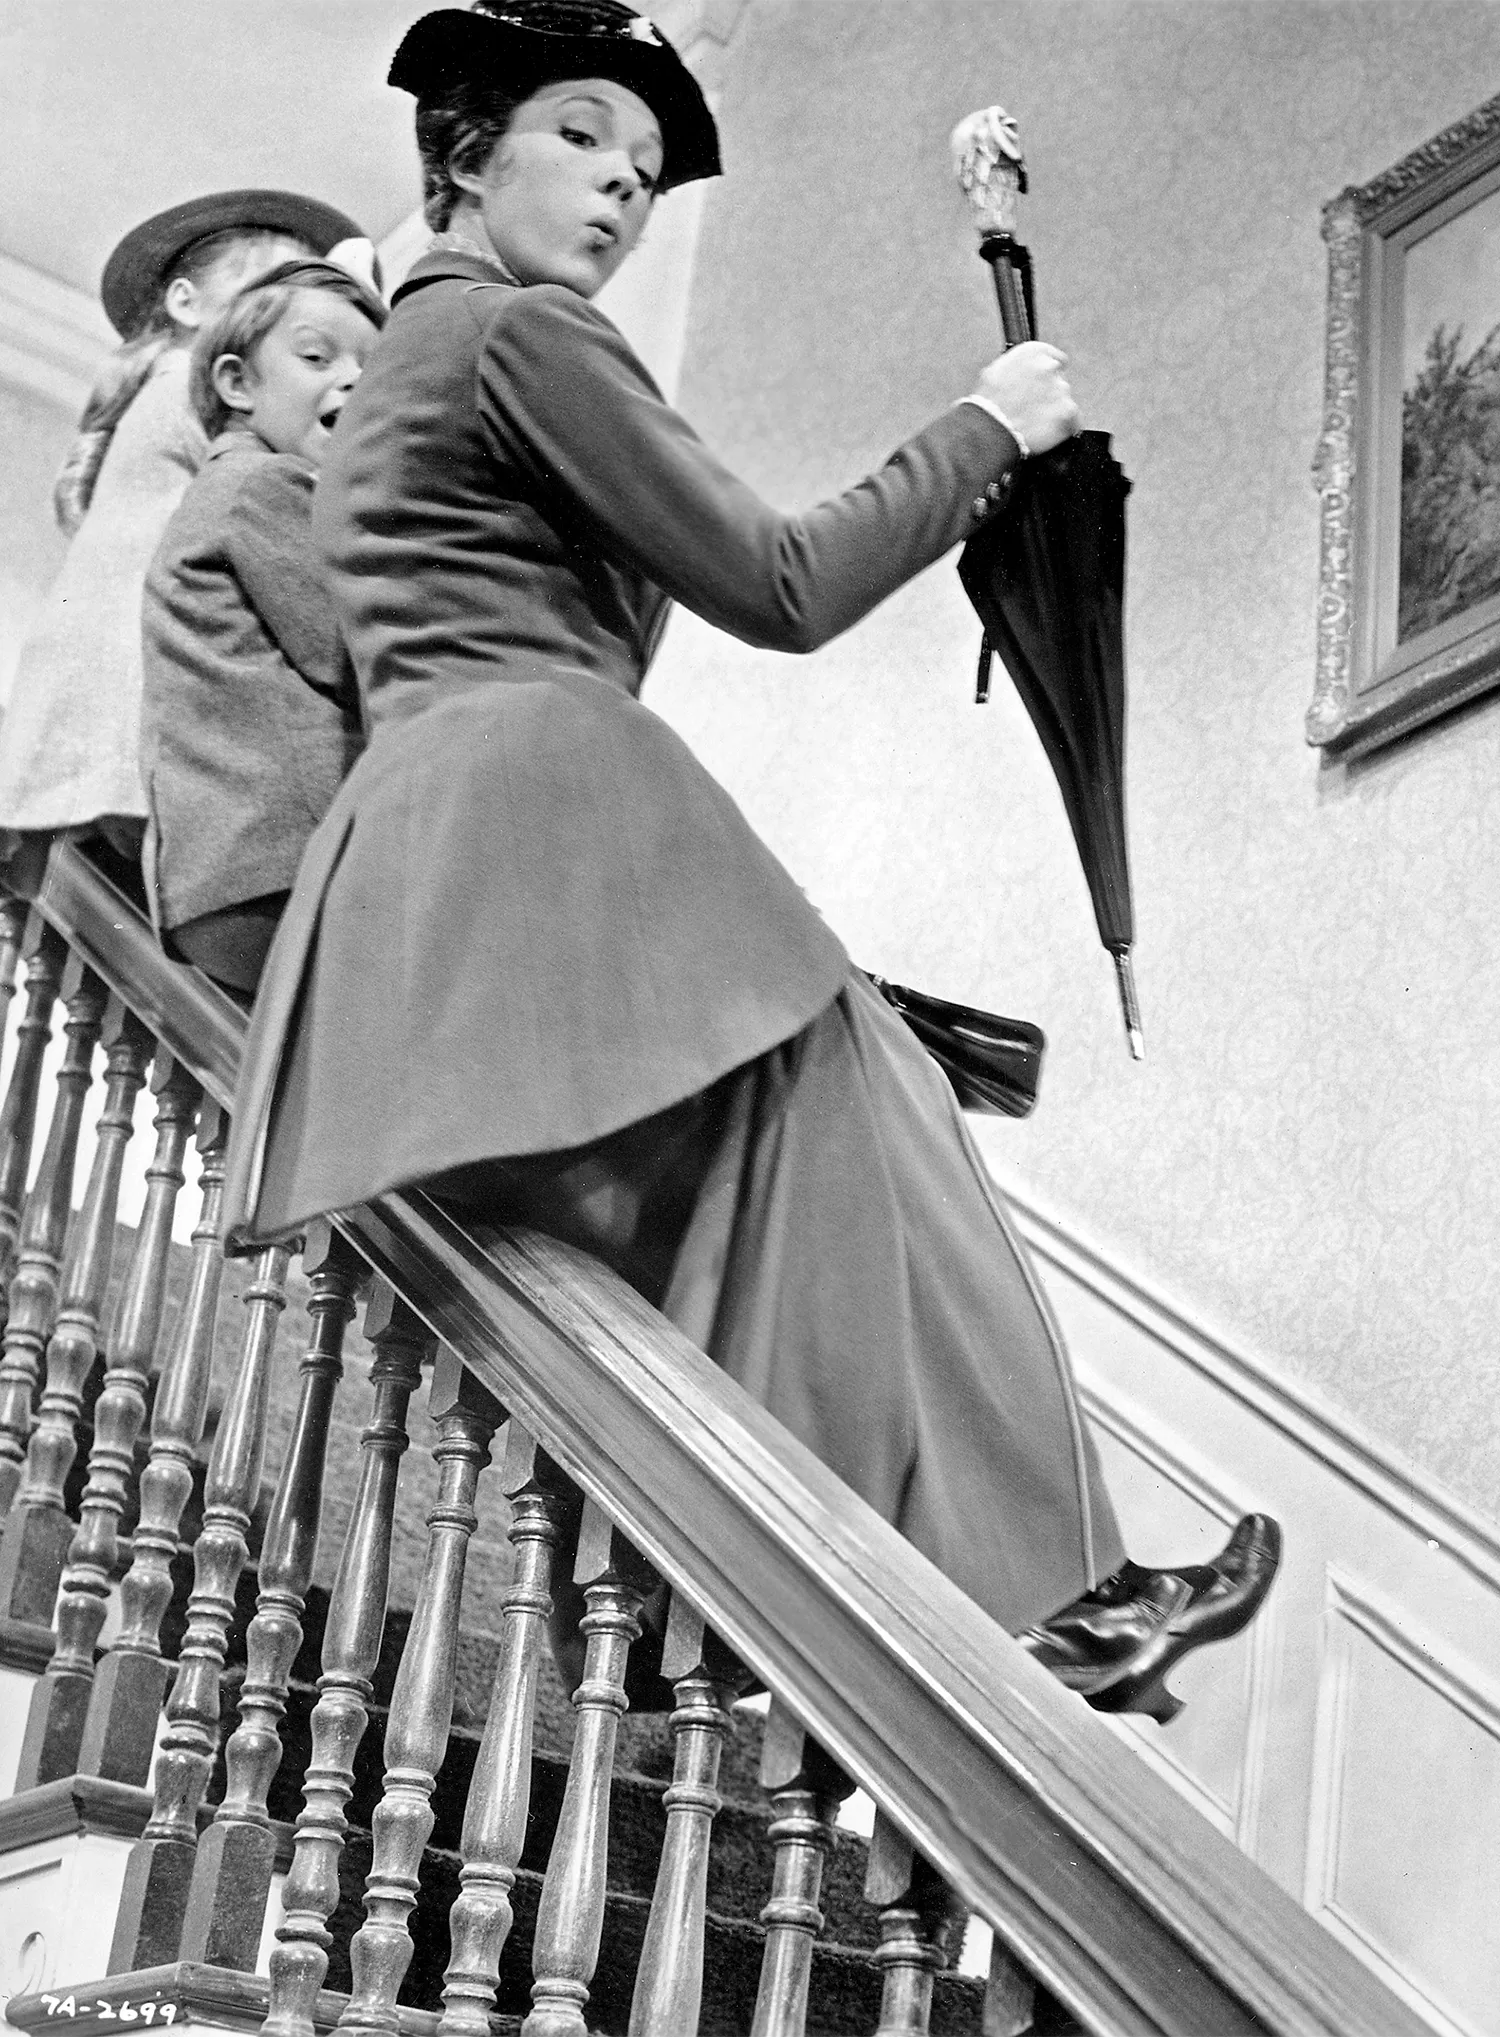 Julie Andrews, playing Mary Poppins, slides down the bannister of a staircase with two children, Jane and Michael, in tow.